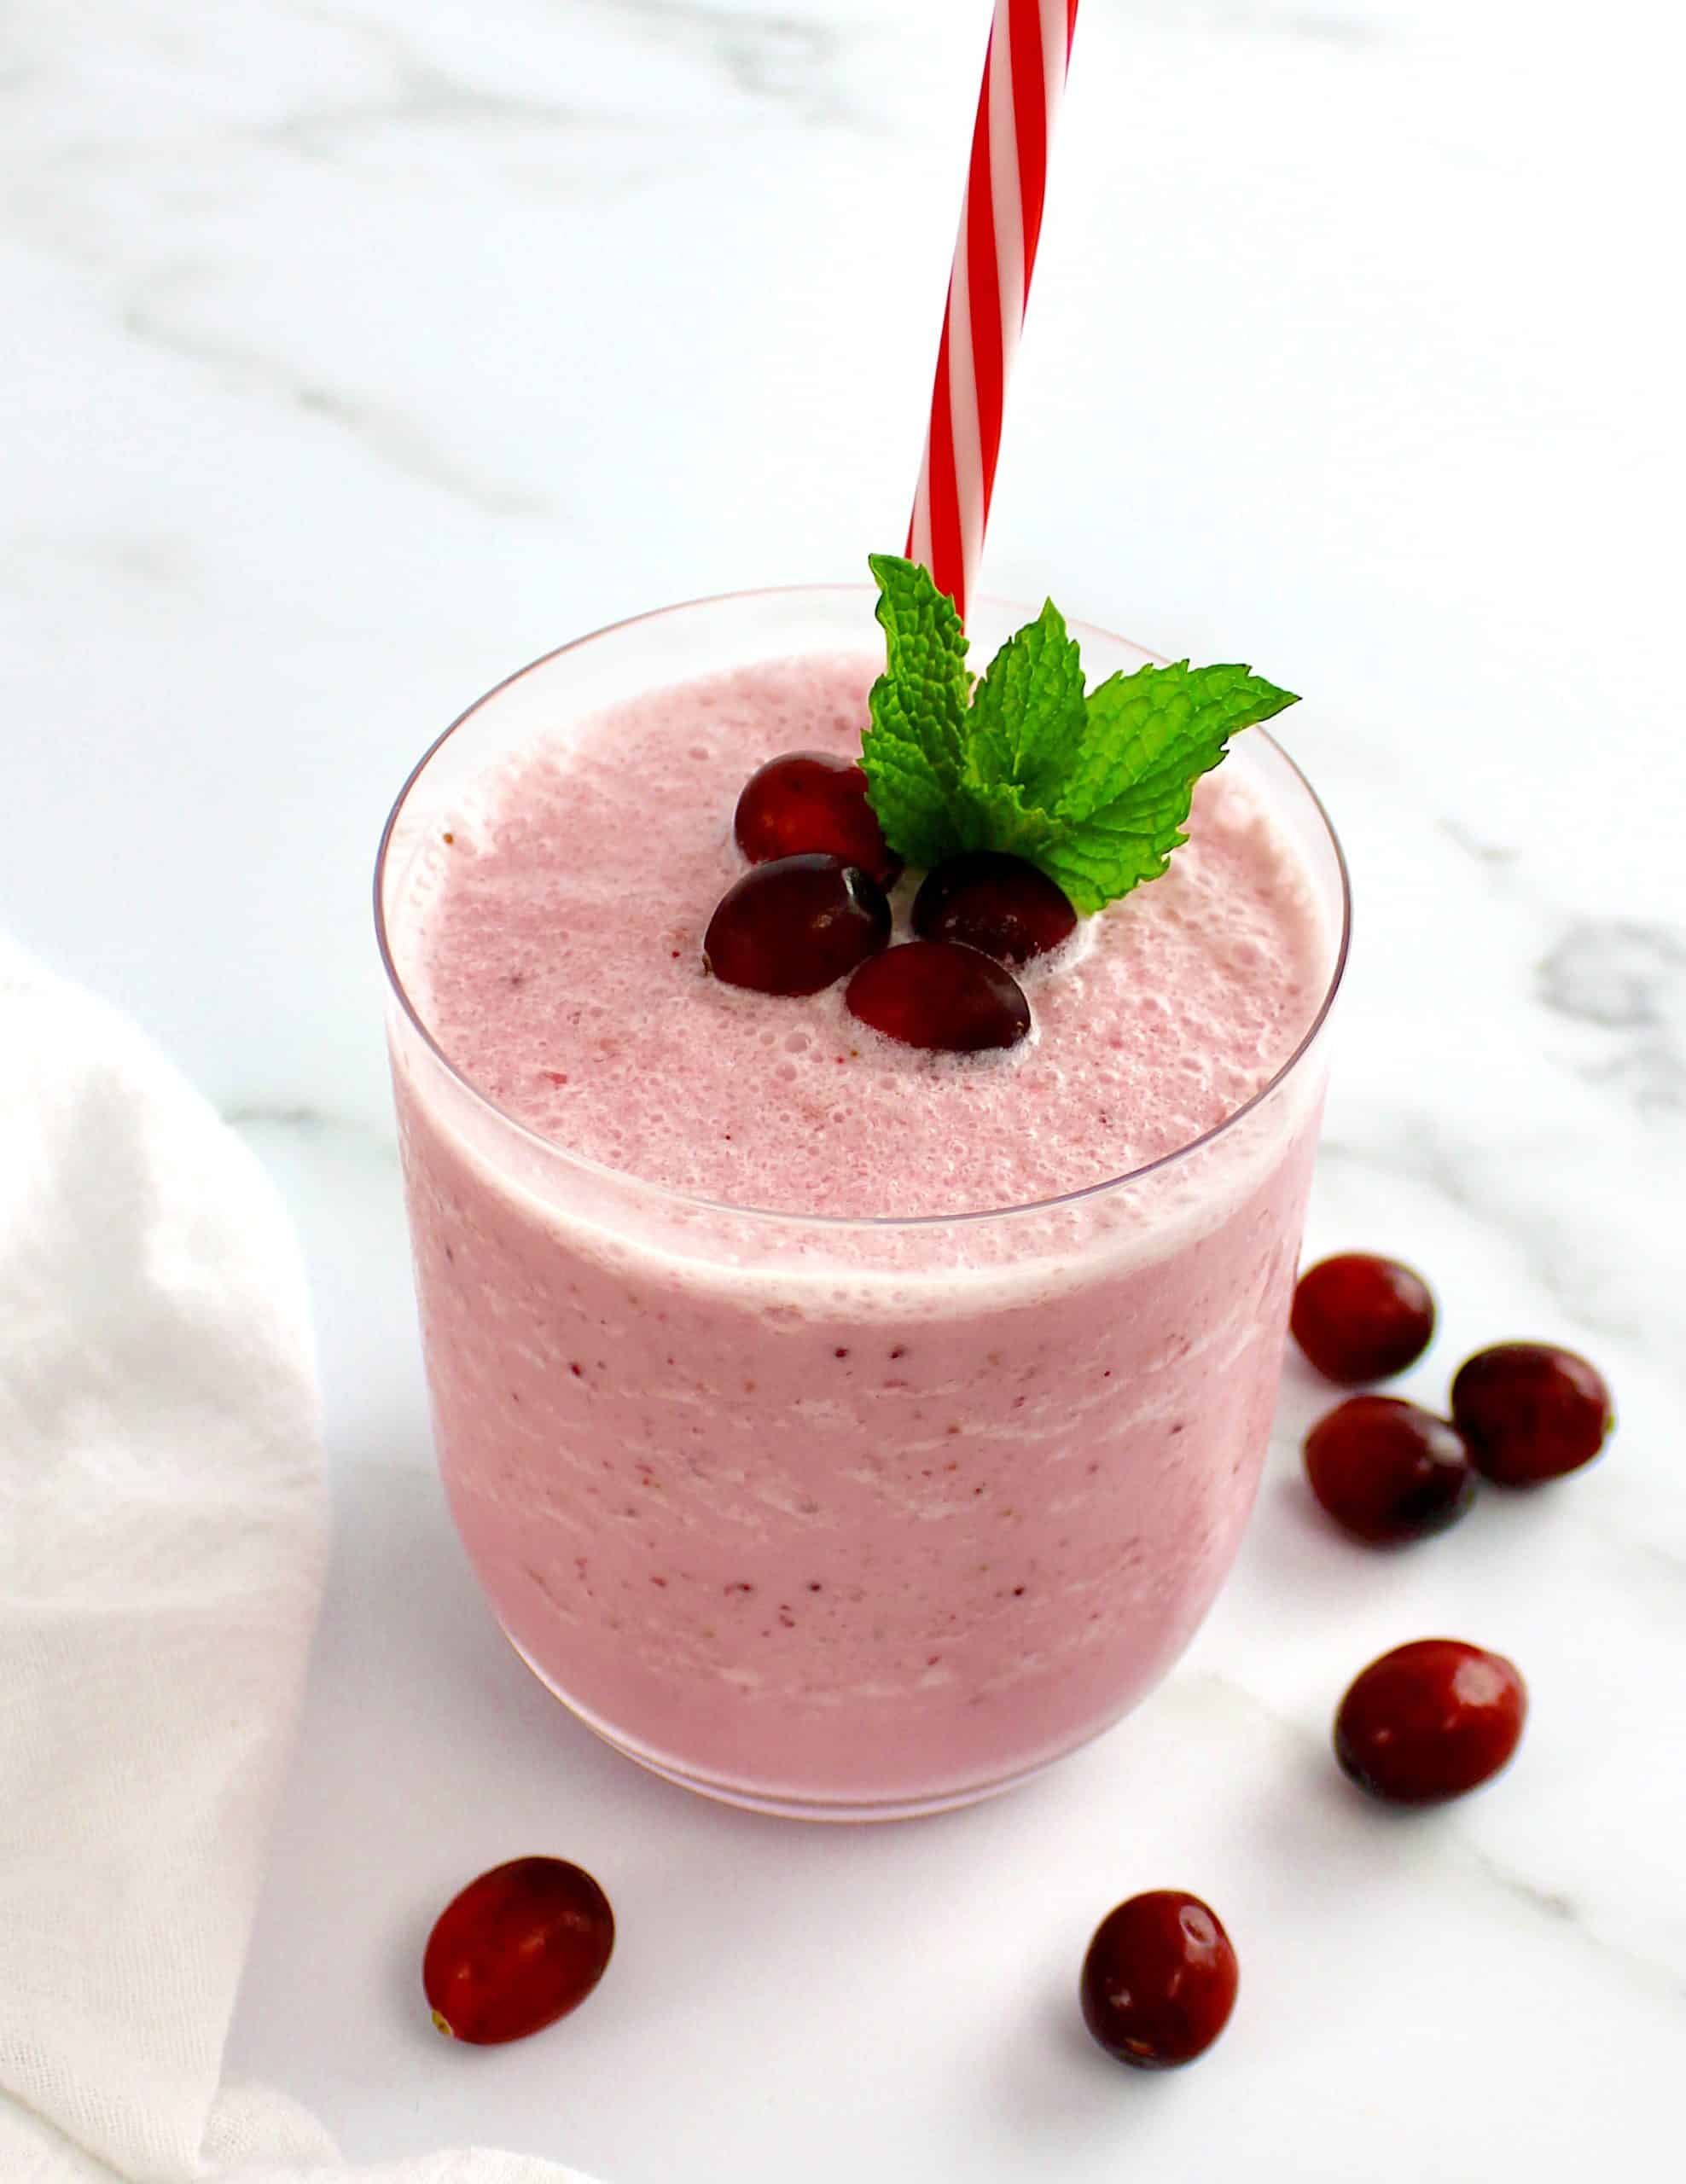 side view of cranberry smoothie with cranberries and mint leaves on top